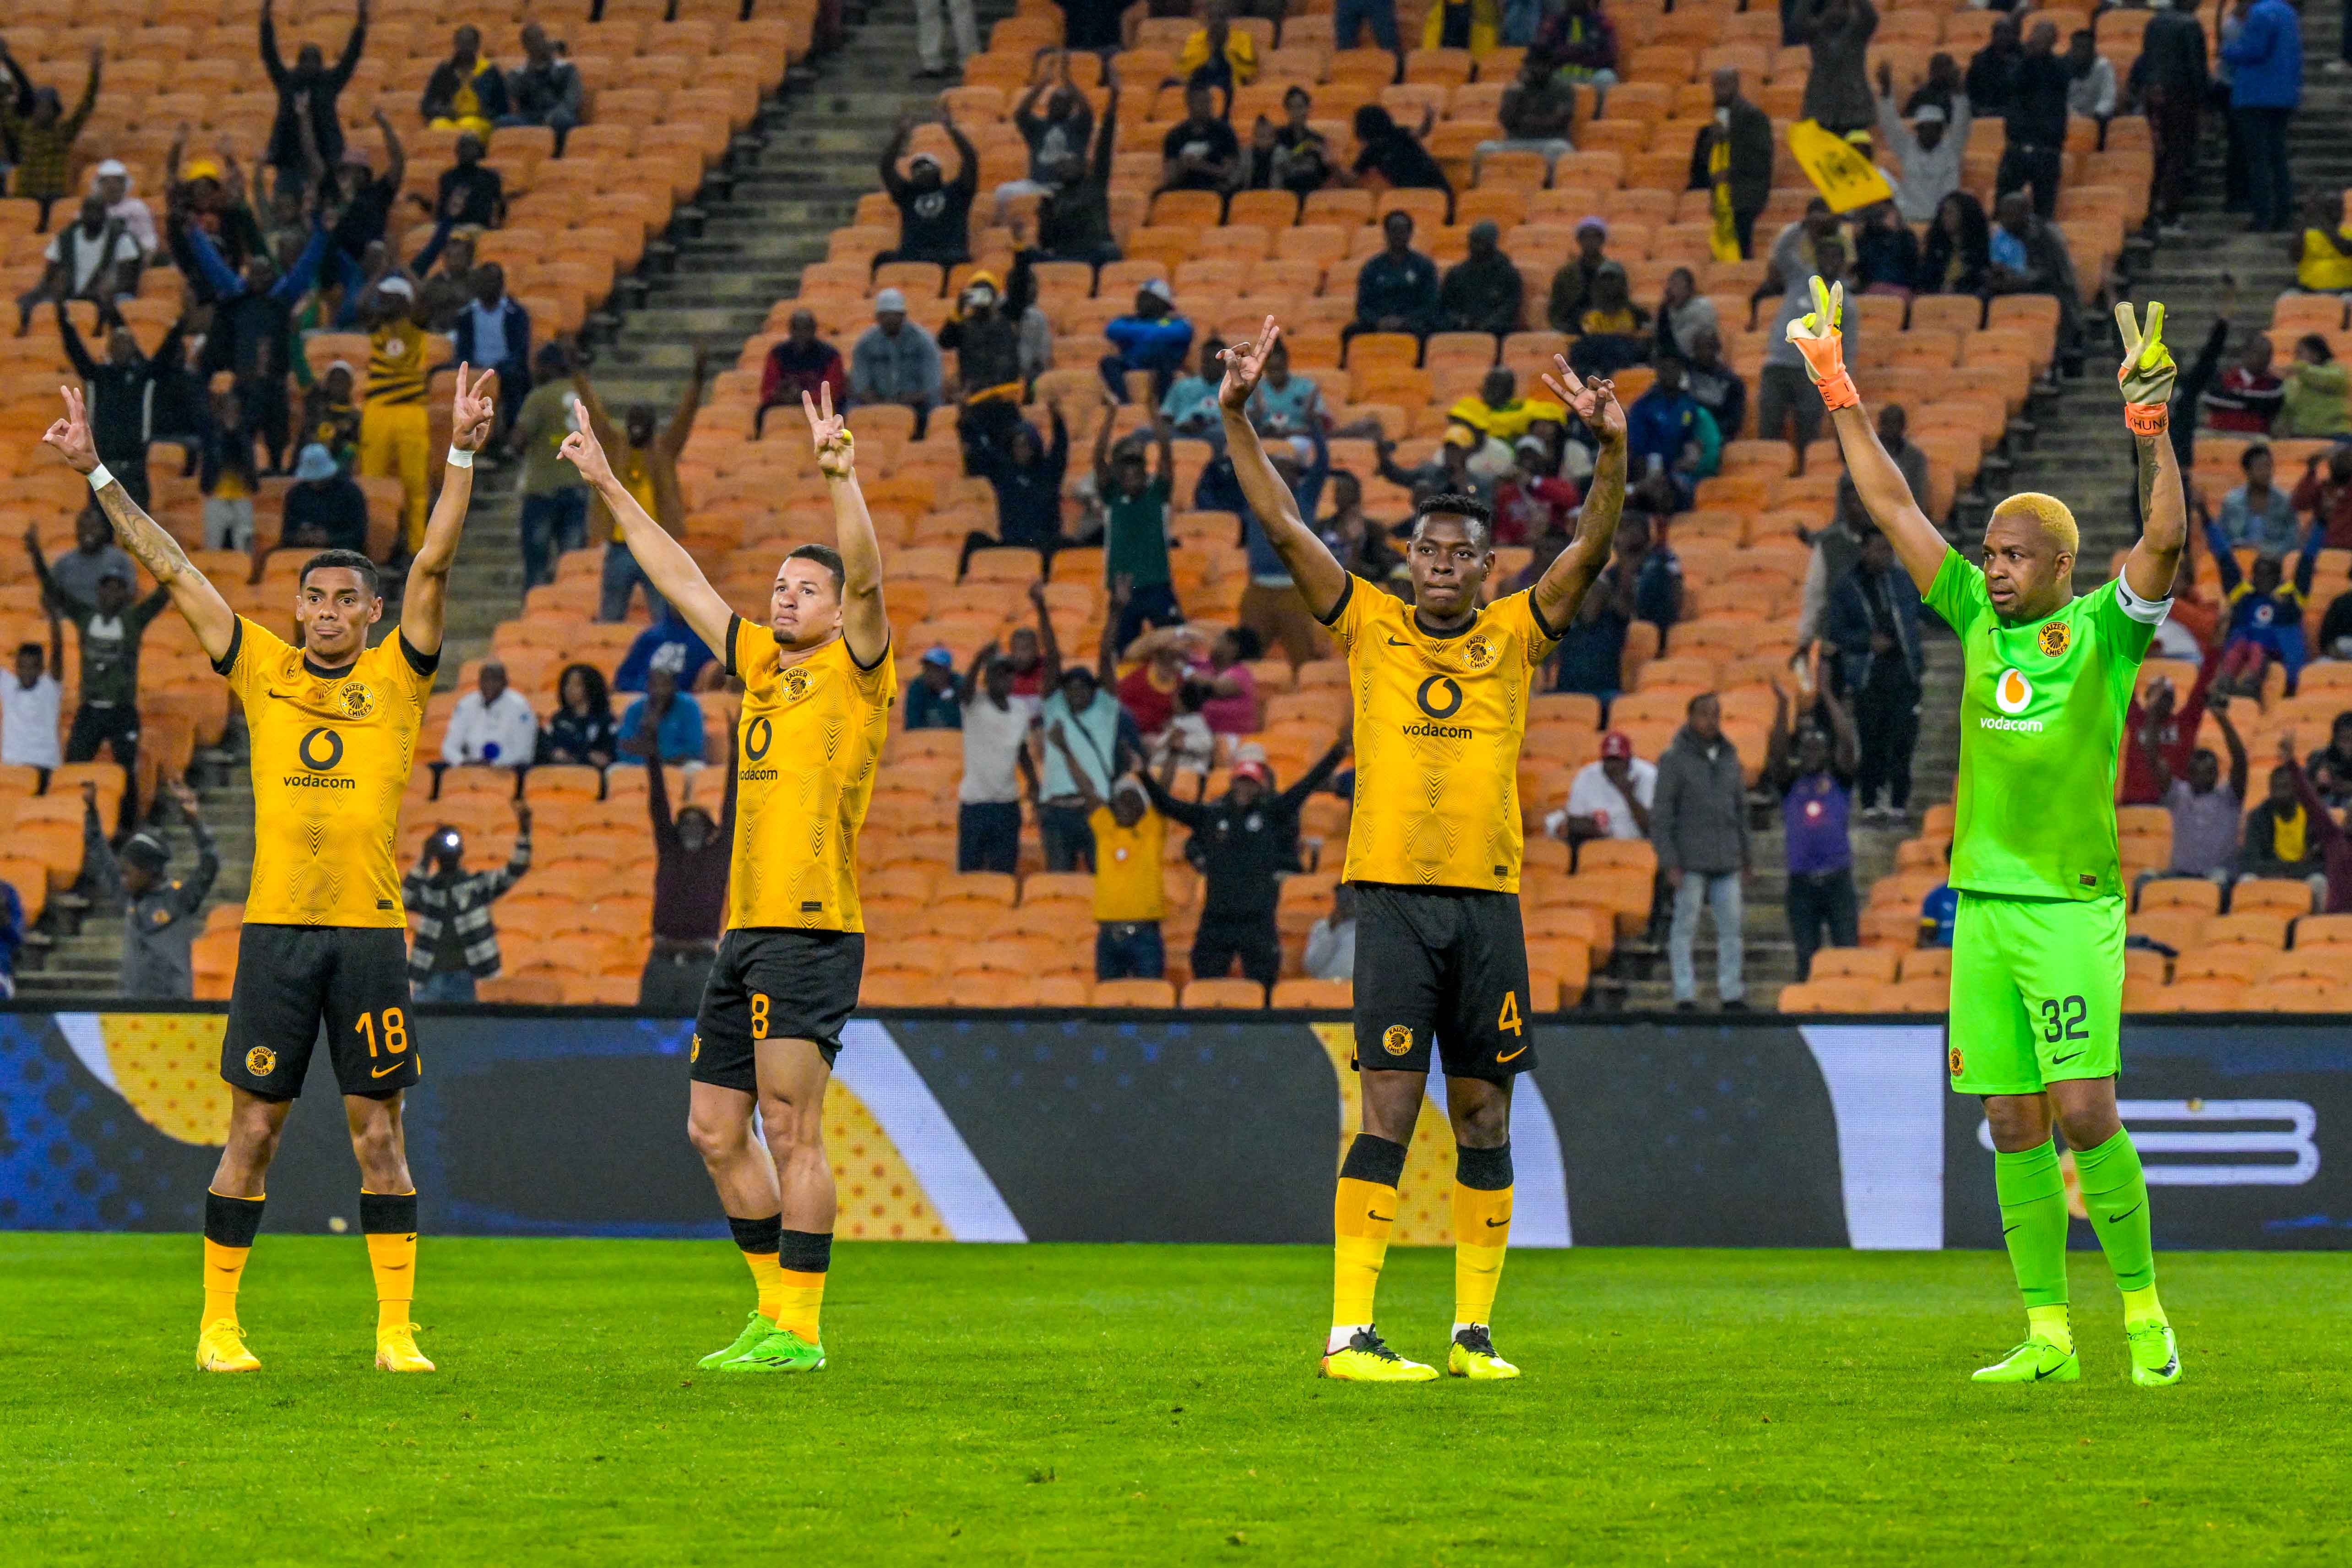 Kaizer Chiefs Players in Dstv Premier clash at FNB Stadium against SuperSport United